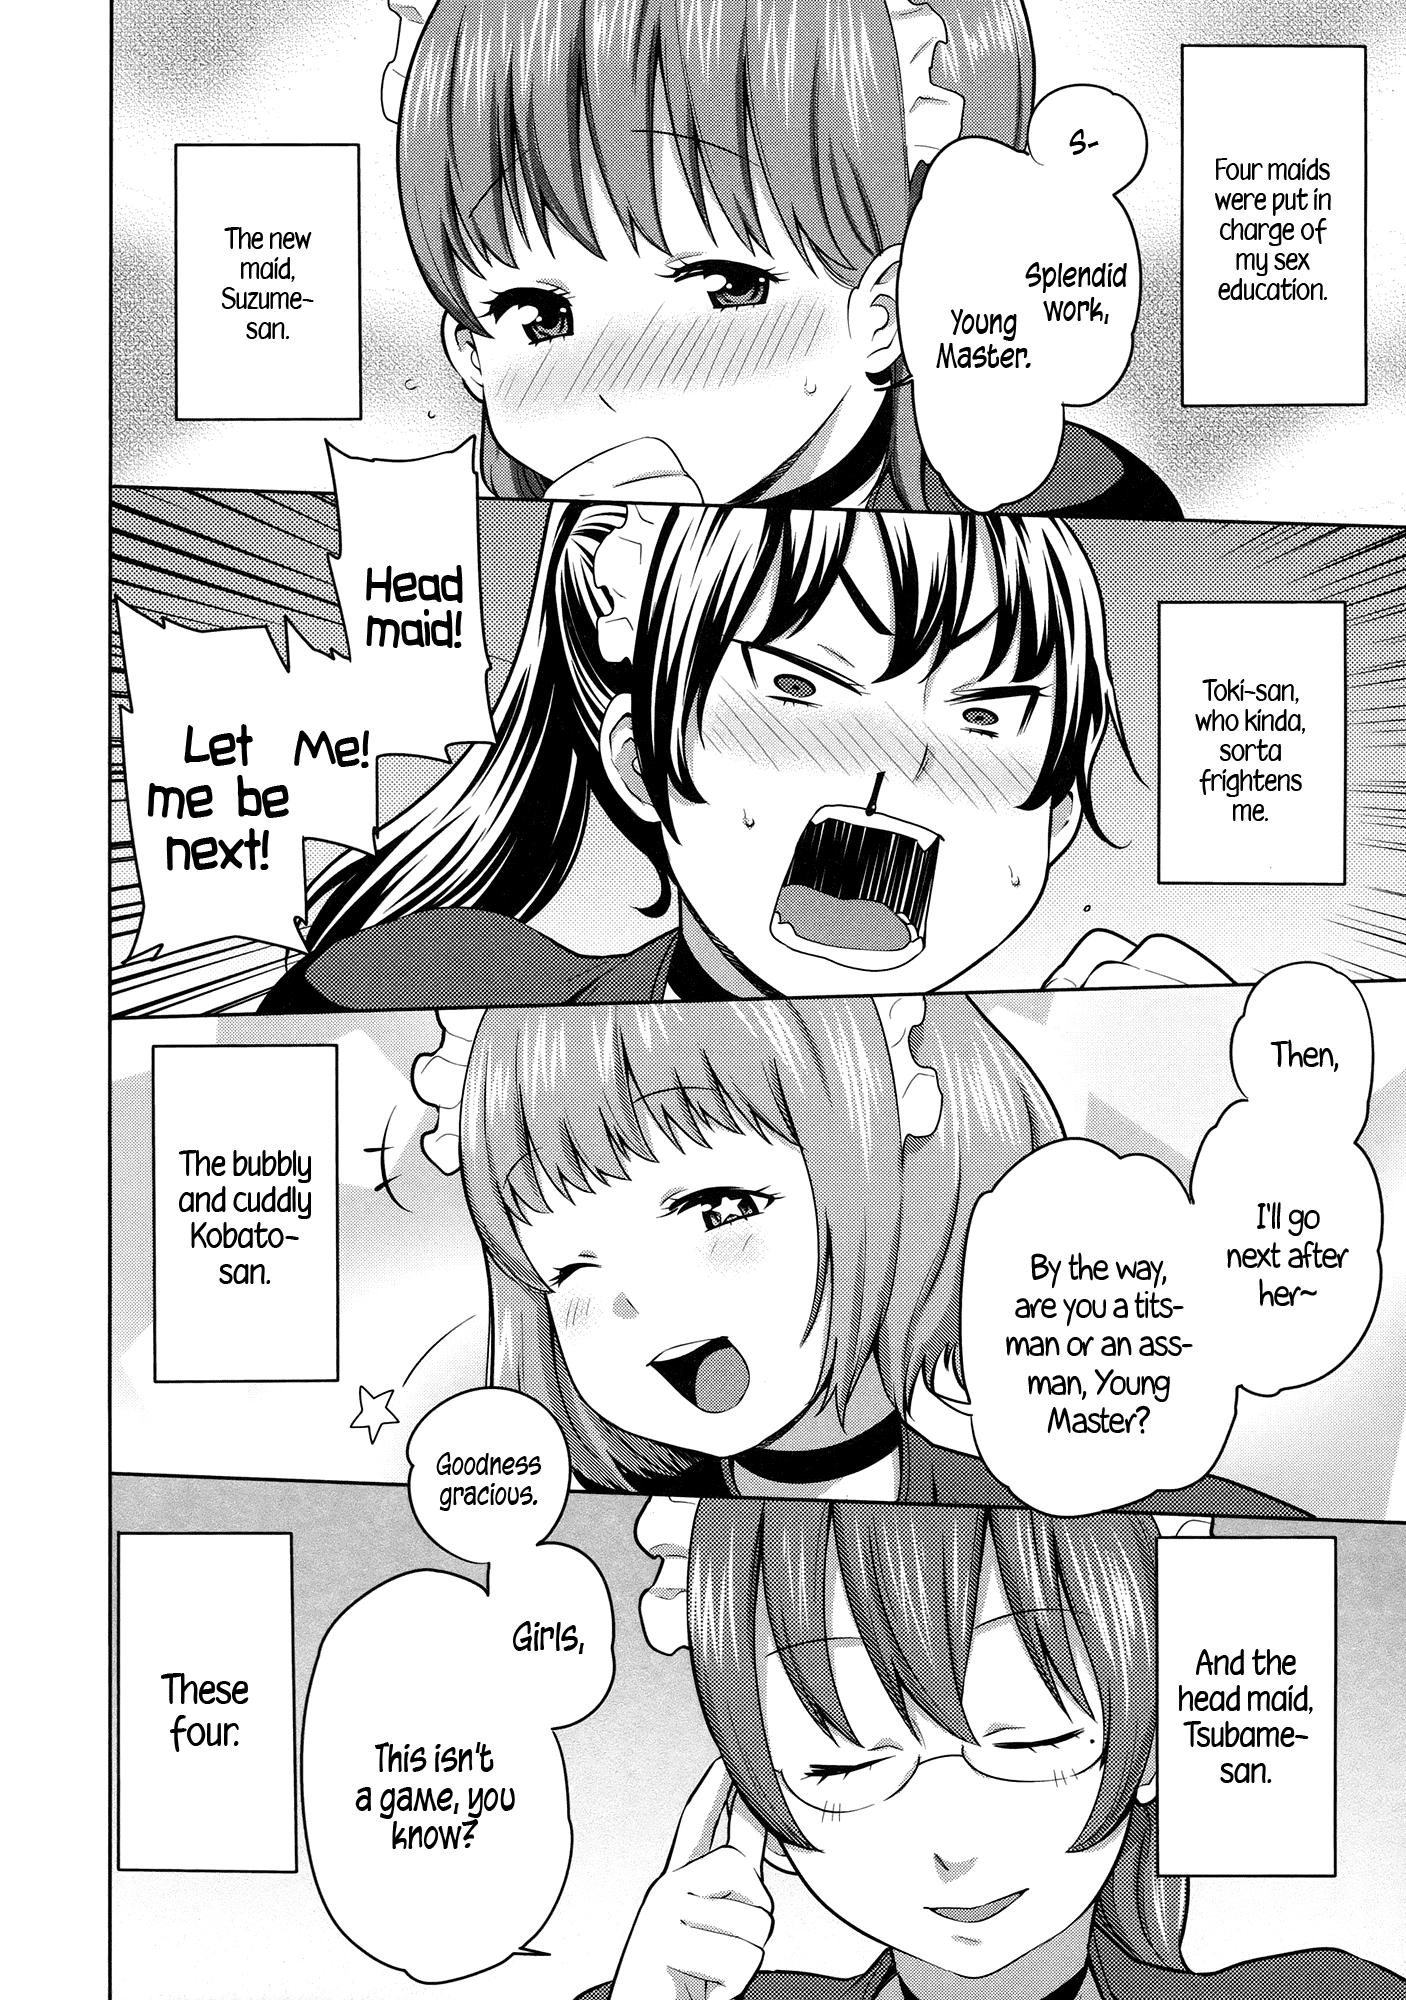 Sweet Maid x4 Ch. 1-6, 8, 10 Blows - Page 11